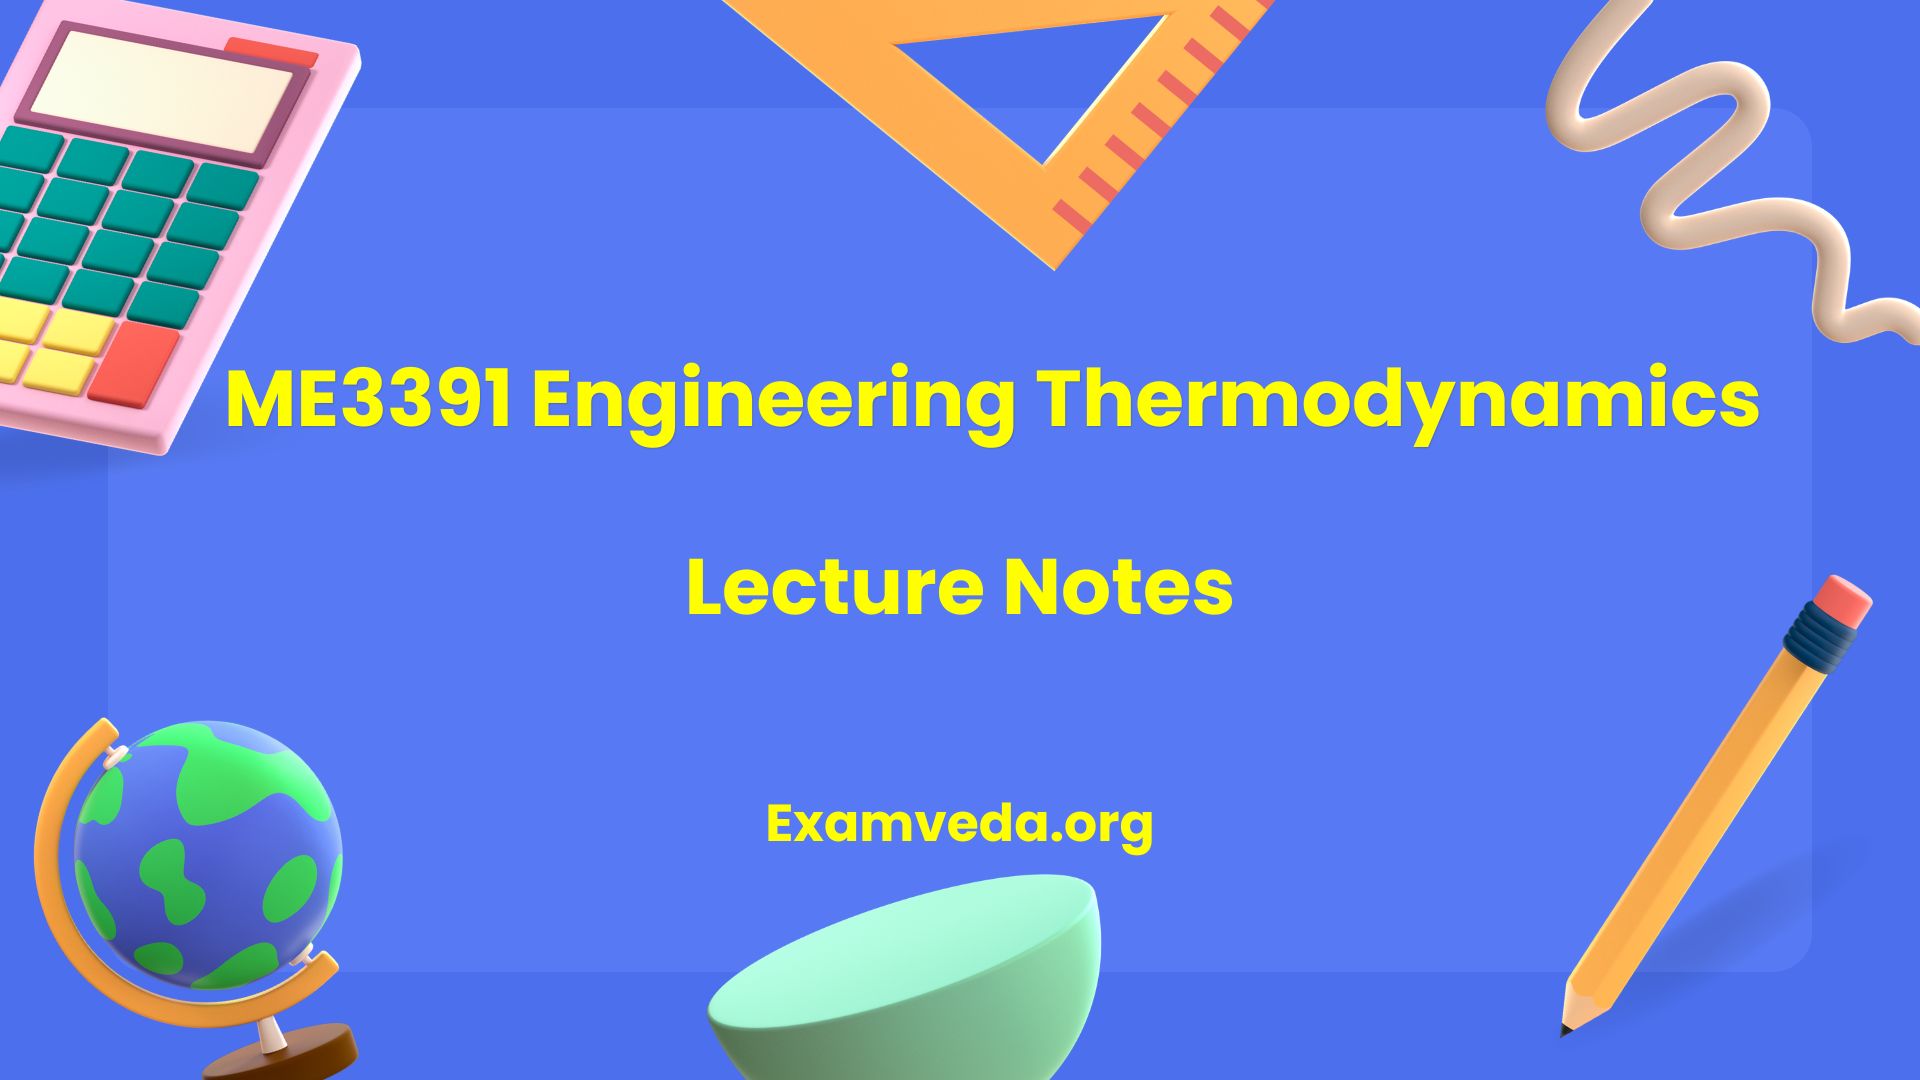 ME3391 Engineering Thermodynamics Lecture Notes